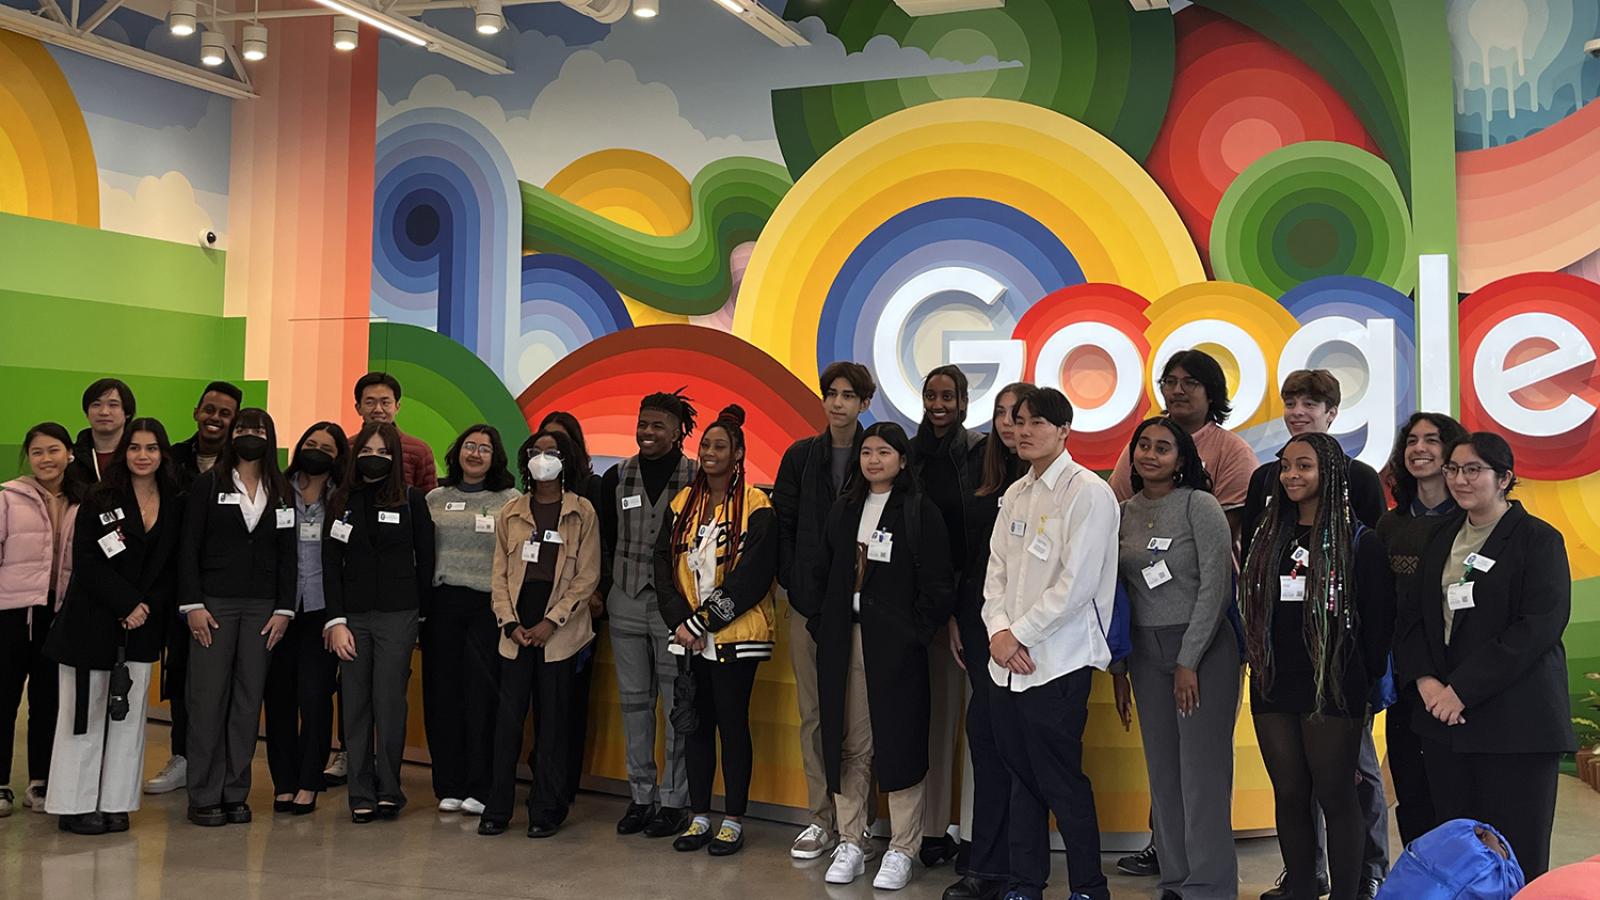 Pomona Smart Start Fellows at Google with big, colorful Google logo behind the group